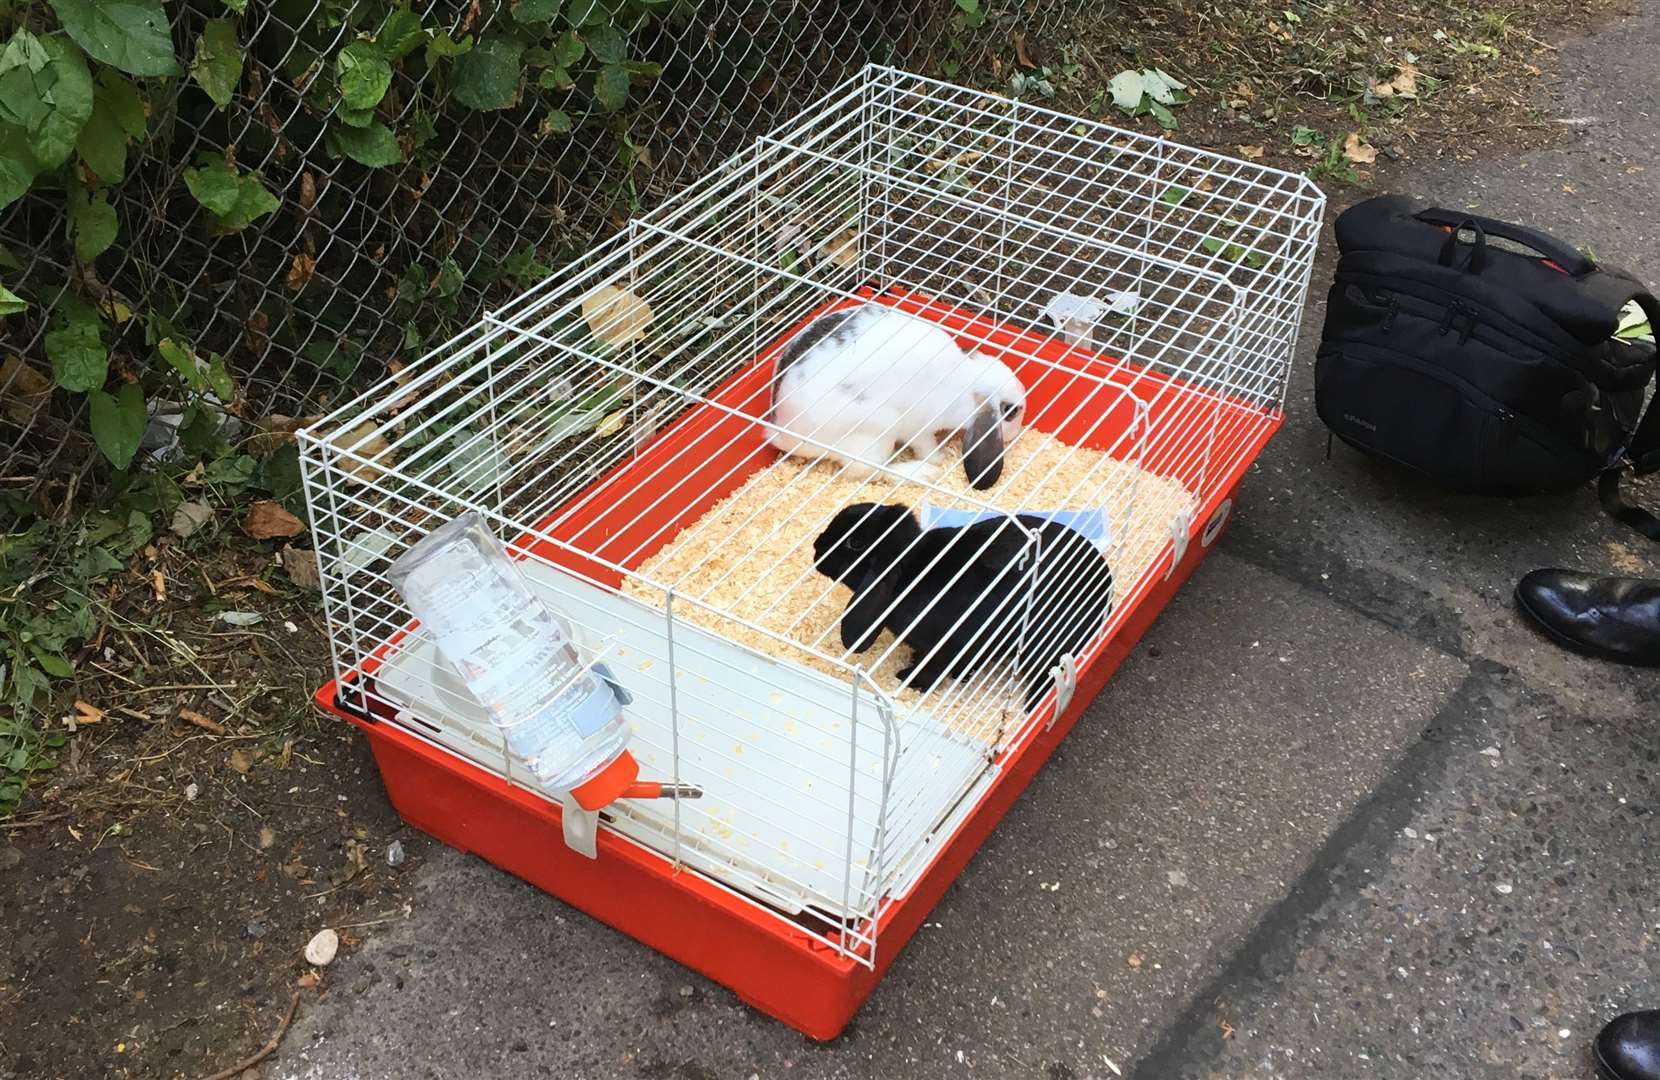 The two rabbits were found abandoned near a train station (14246901)